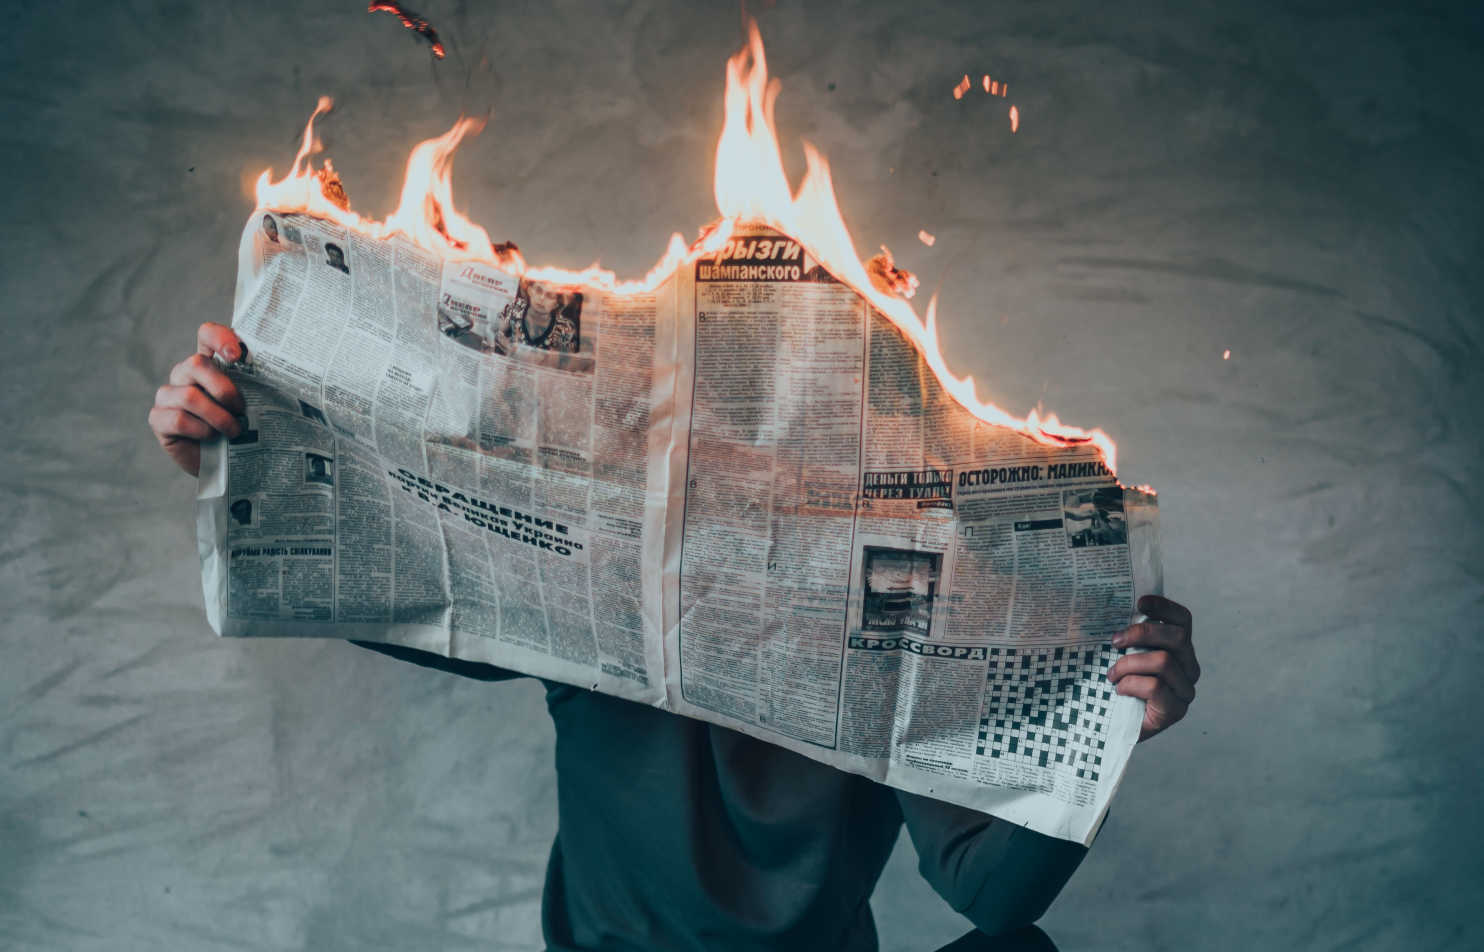 Public Relations: Does your headline sizzle? 8 tips + one great idea